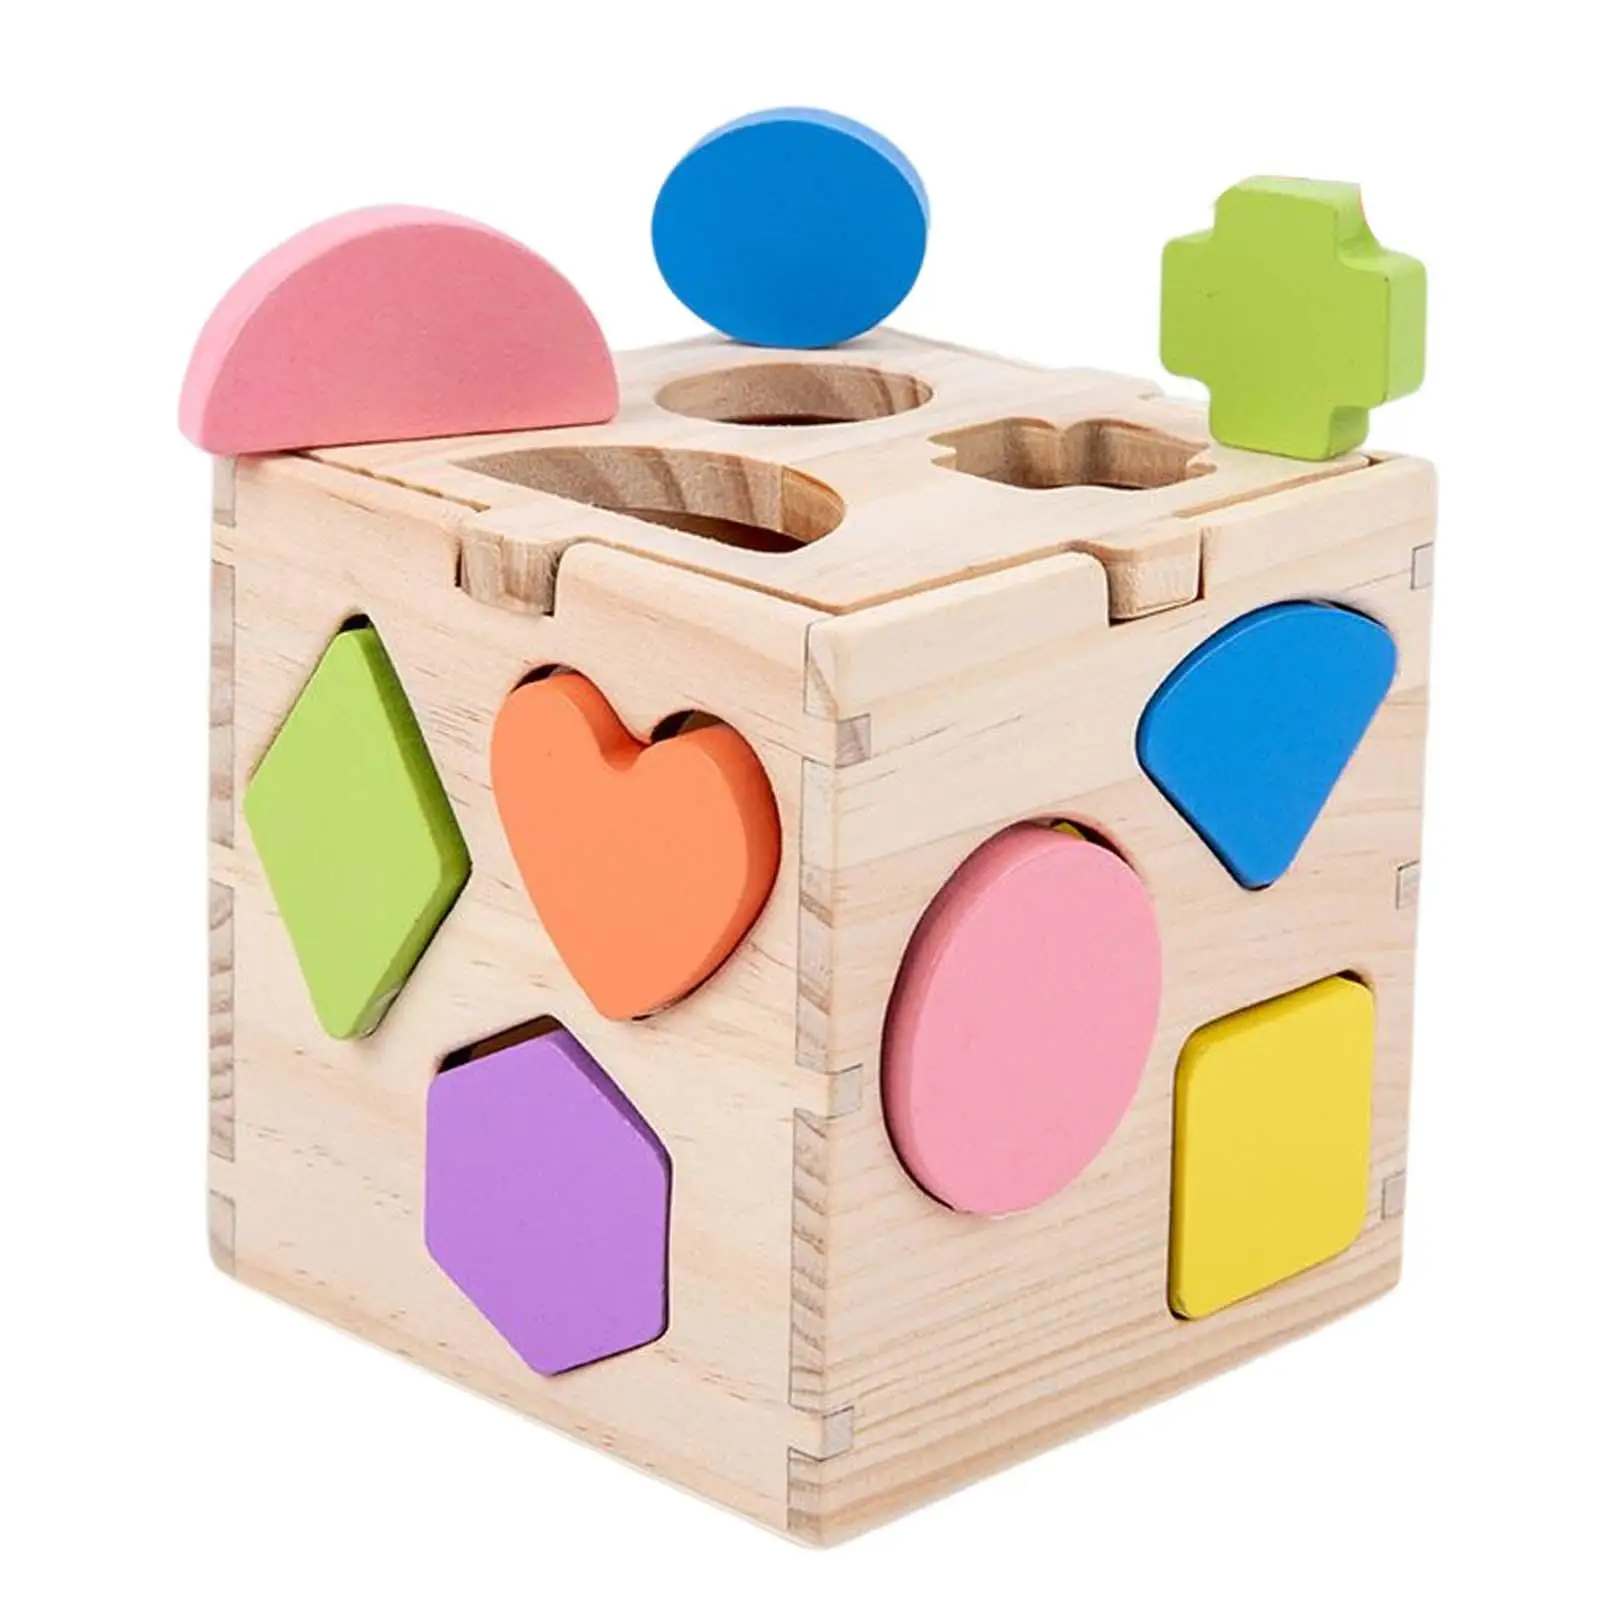 Geometric Shape Blocks Early Educational Learning Toy Preschool Learning Toys Develop Fine Motor Skill for Toddlers Girls Gifts